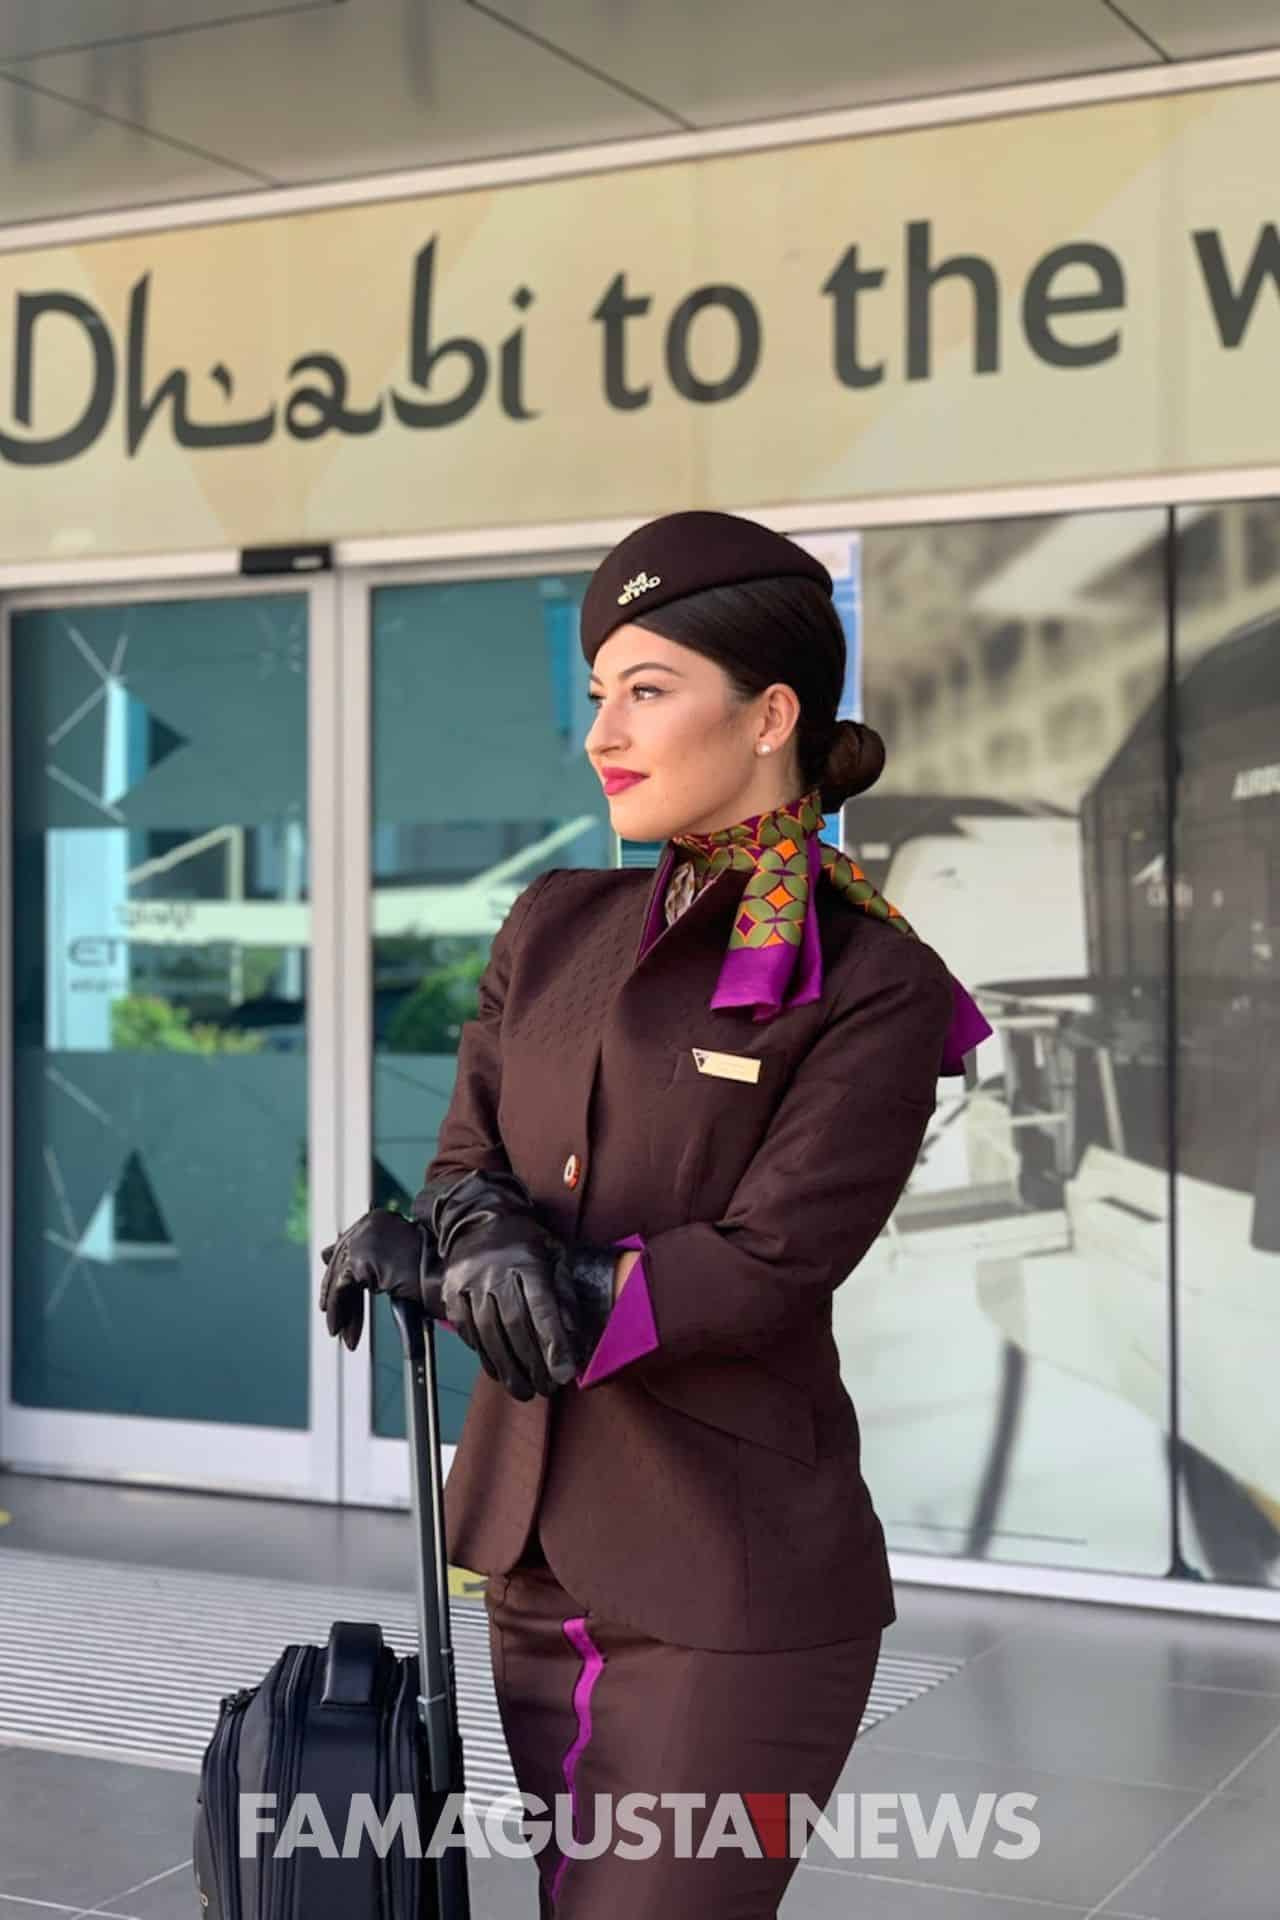 Thank you Instagram story exclusive, air hostess